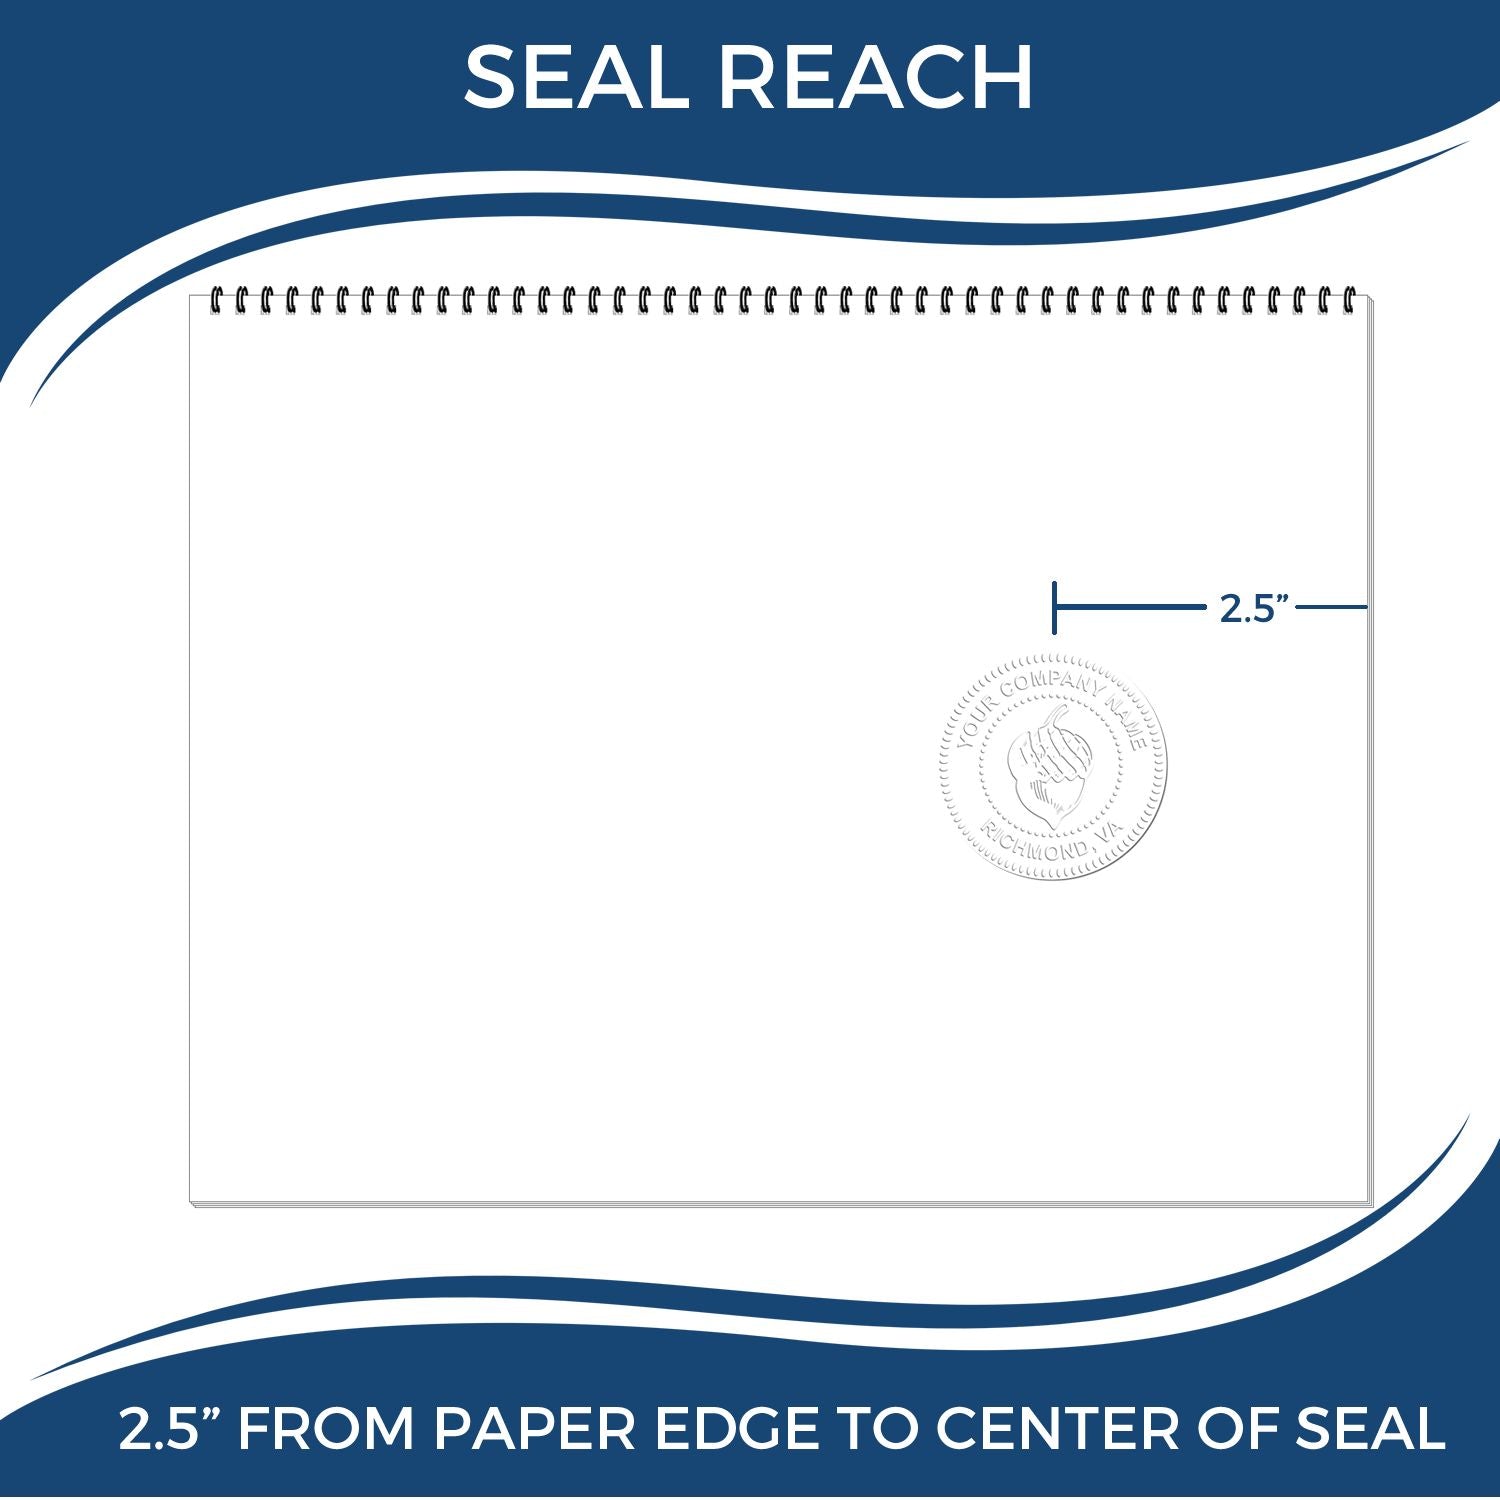 An infographic showing the seal reach which is represented by a ruler and a miniature seal image of the Tennessee Long Reach Landscape Architect Embossing Stamp